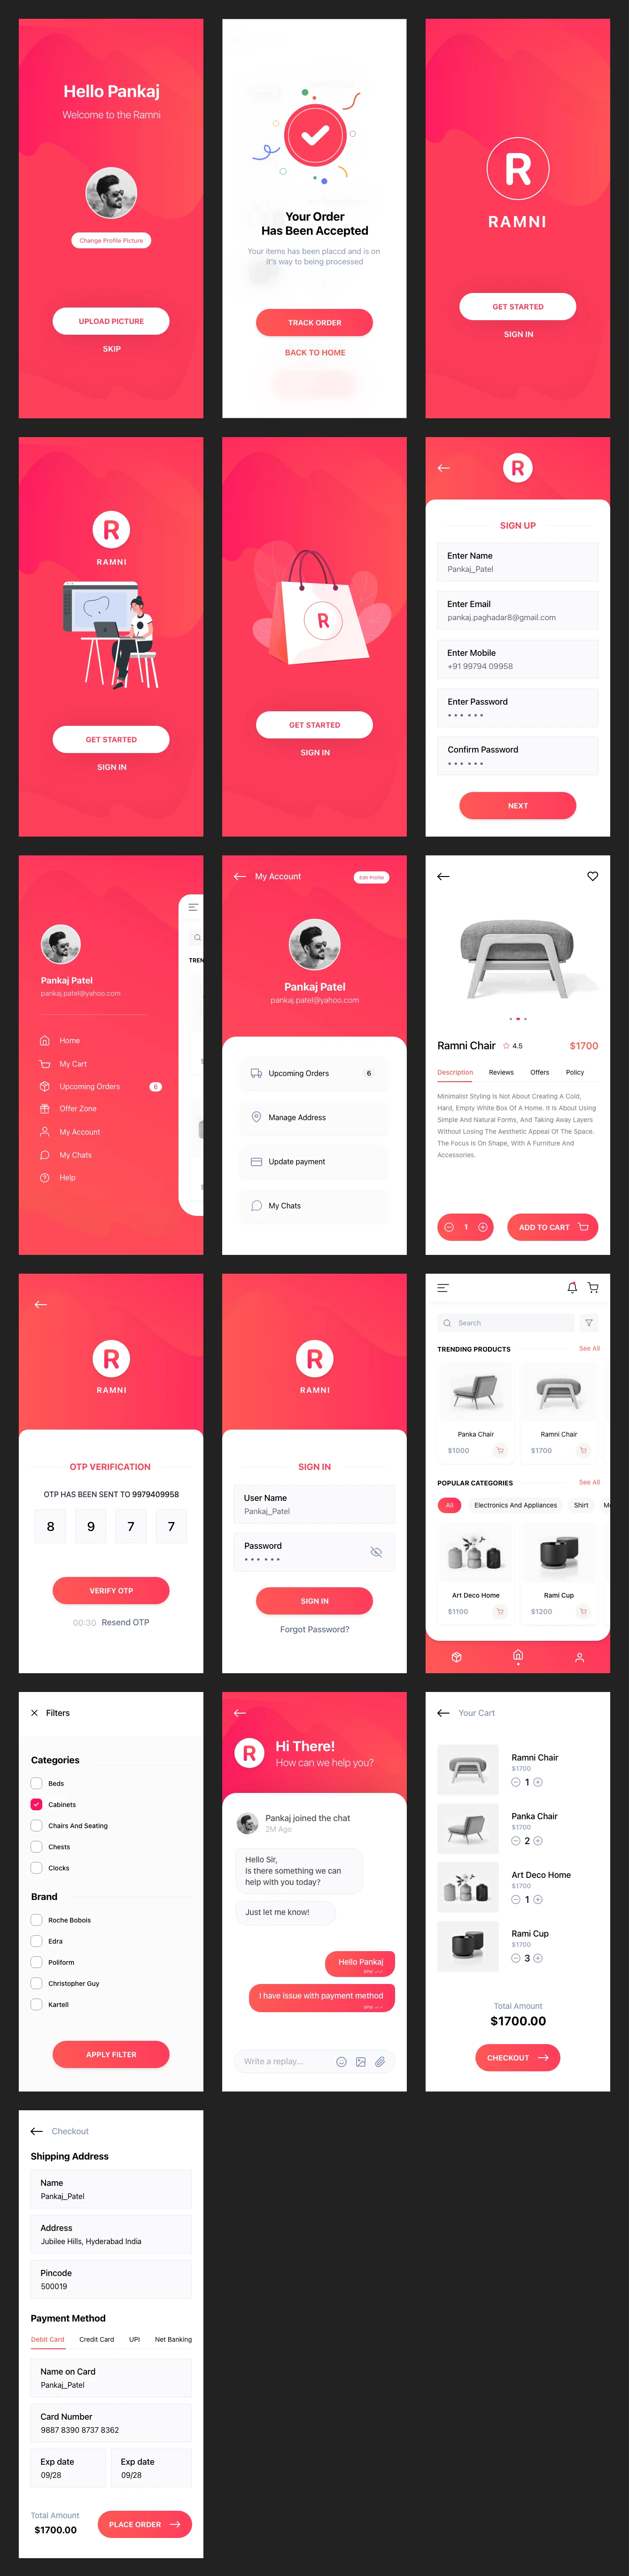 Ramni - Free eCommerce UI Kit for Adobe XD - A multipurpose UI KIT for all Mobile Apps, designed with classic design style without leaving a shopping feel. Suitable for all businesses or startups that provide services. Modifying the template is quite simple